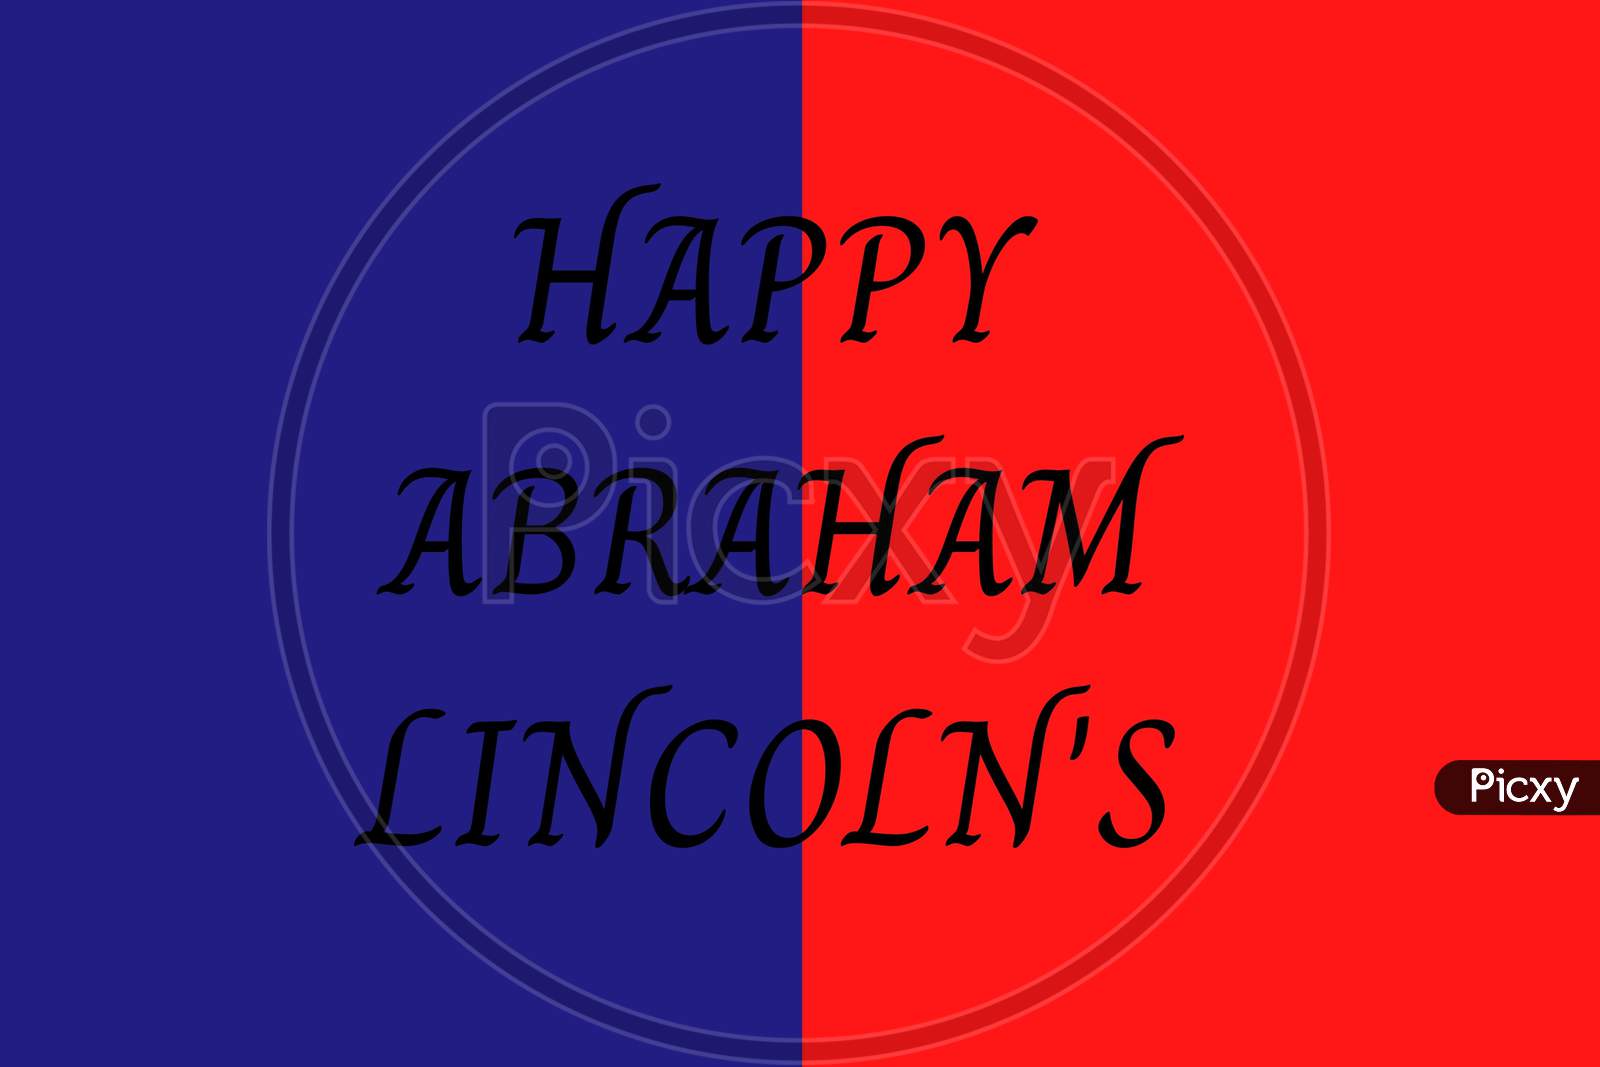 Abraham Lincoln’S Birthday. With Text In Red And Blue Color . National Holiday In The United States. Poster, Banner And Background . Birthday Of One Of The Most Popular Presidents Of America.